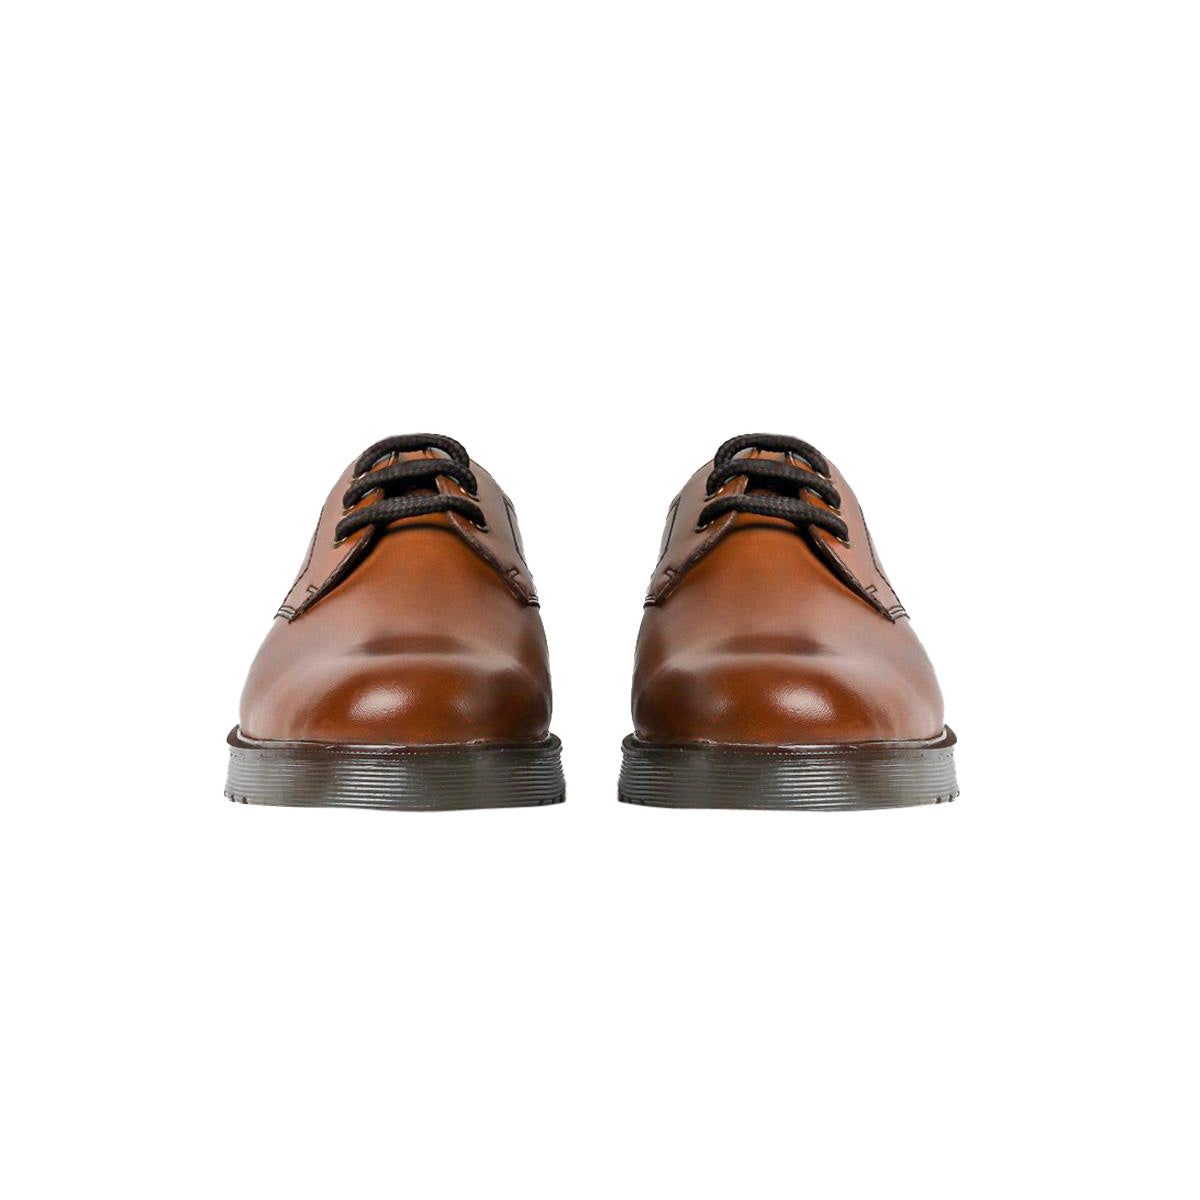 Men Leather Casual Derby Shoes ǀ BARRY 5015